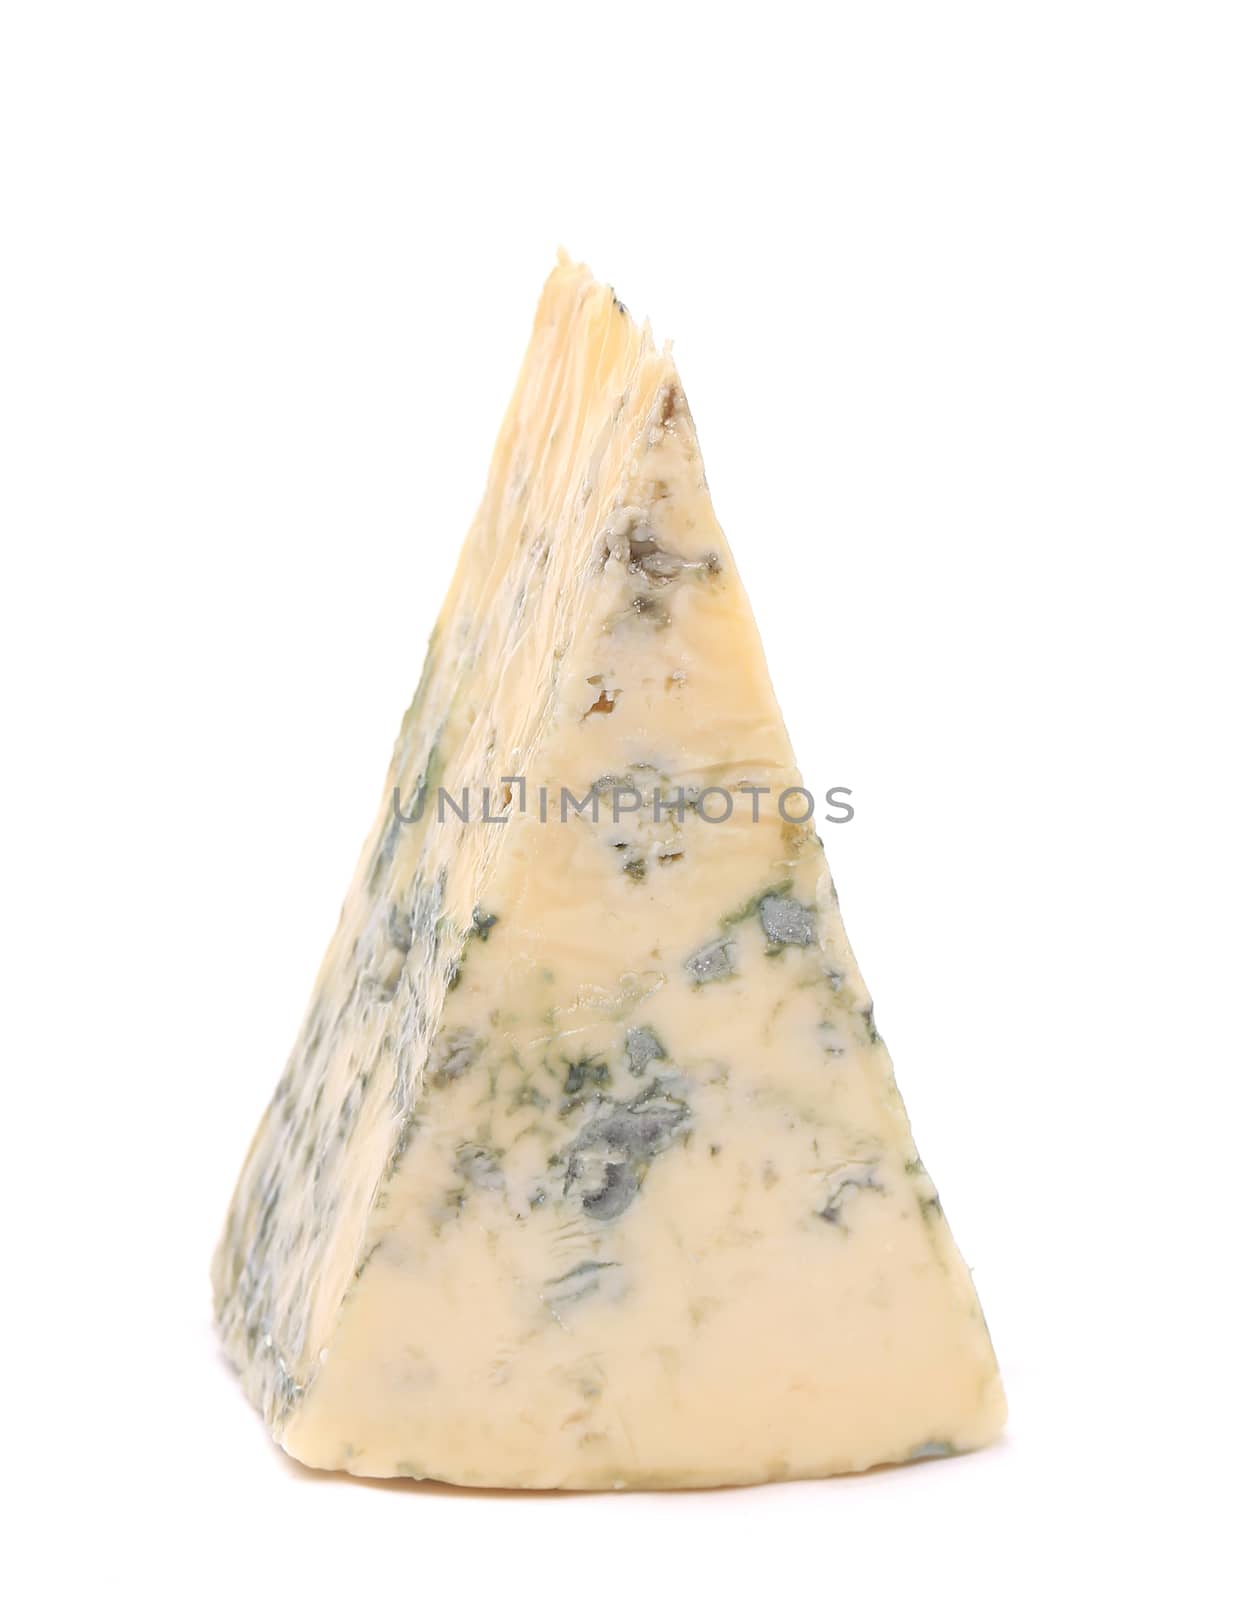 Slice of dor blue cheese. Isolated on a white background.